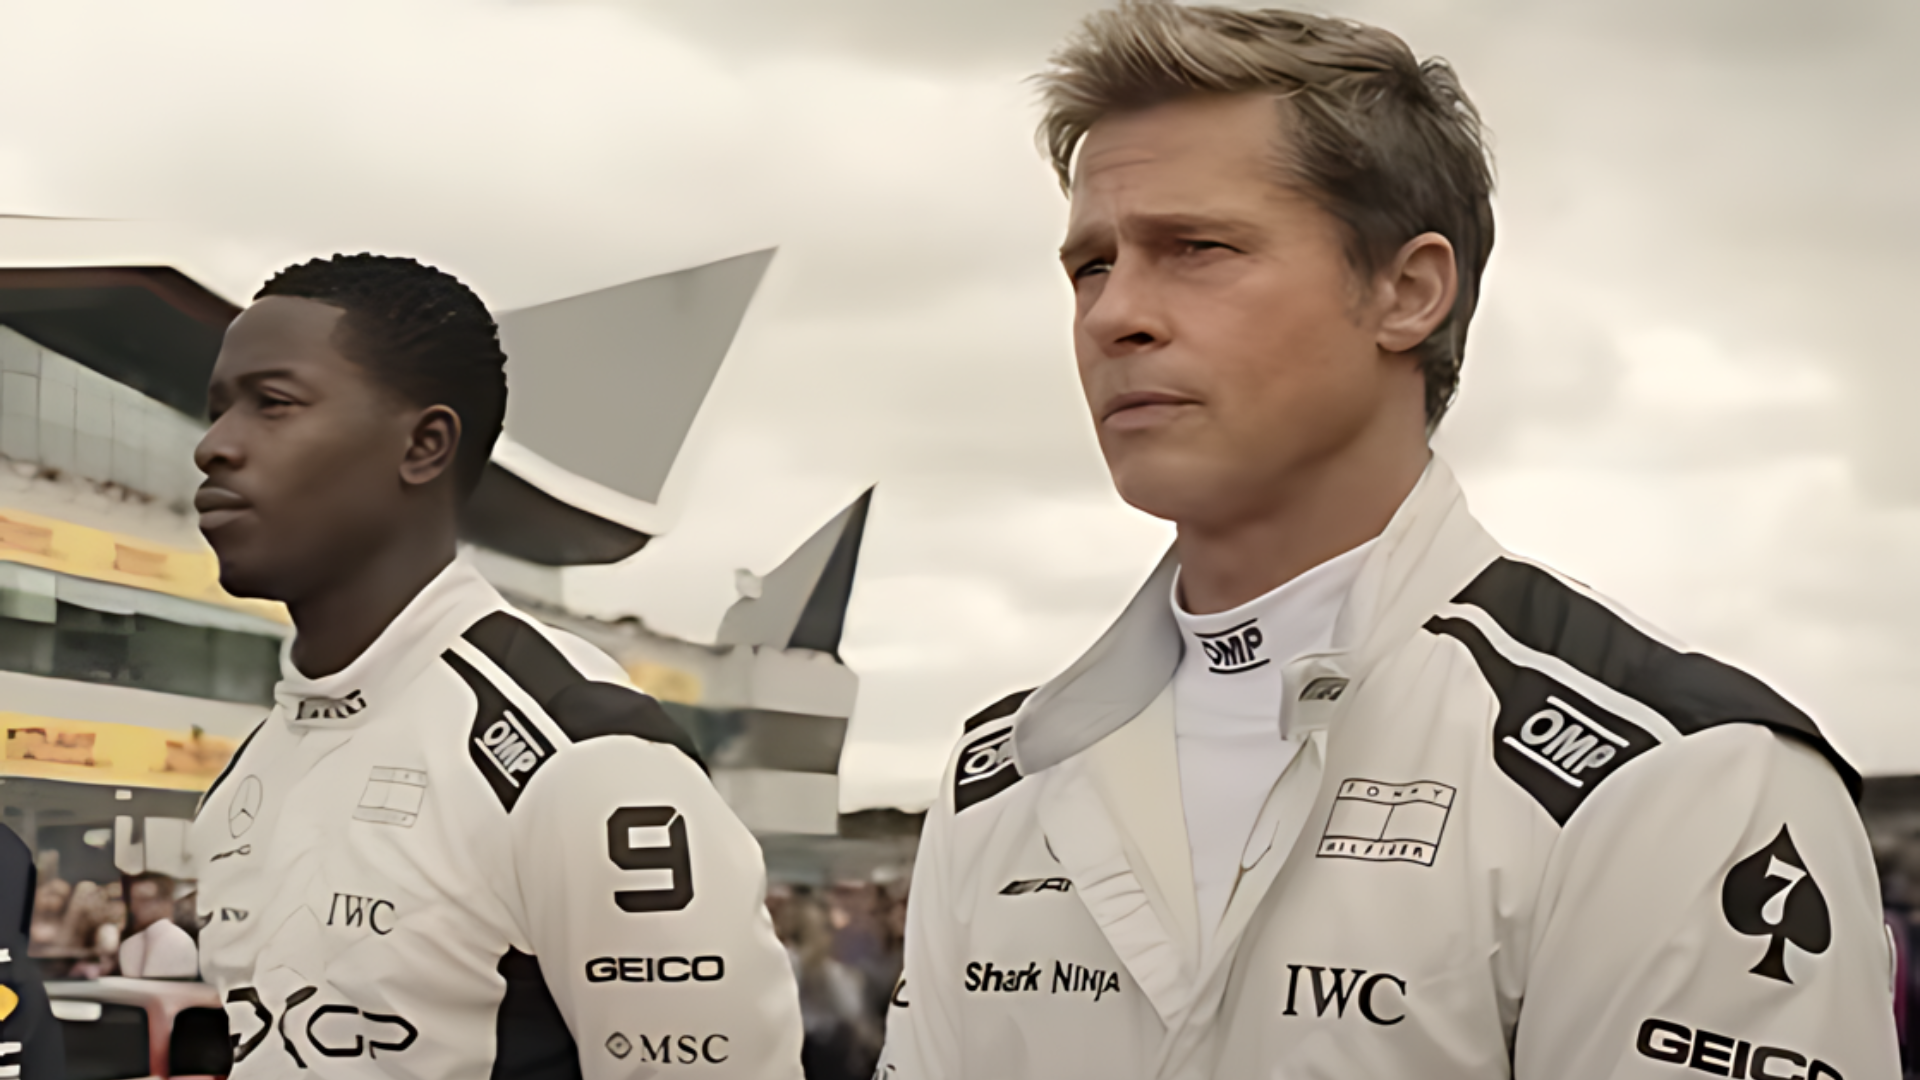 F1 Teaser Trailer: 60-Year-Old Brad Pitt Gets In The Driver Seat As Formula 1 Driver, Internet Says, ‘Most Ridiculous Thing’